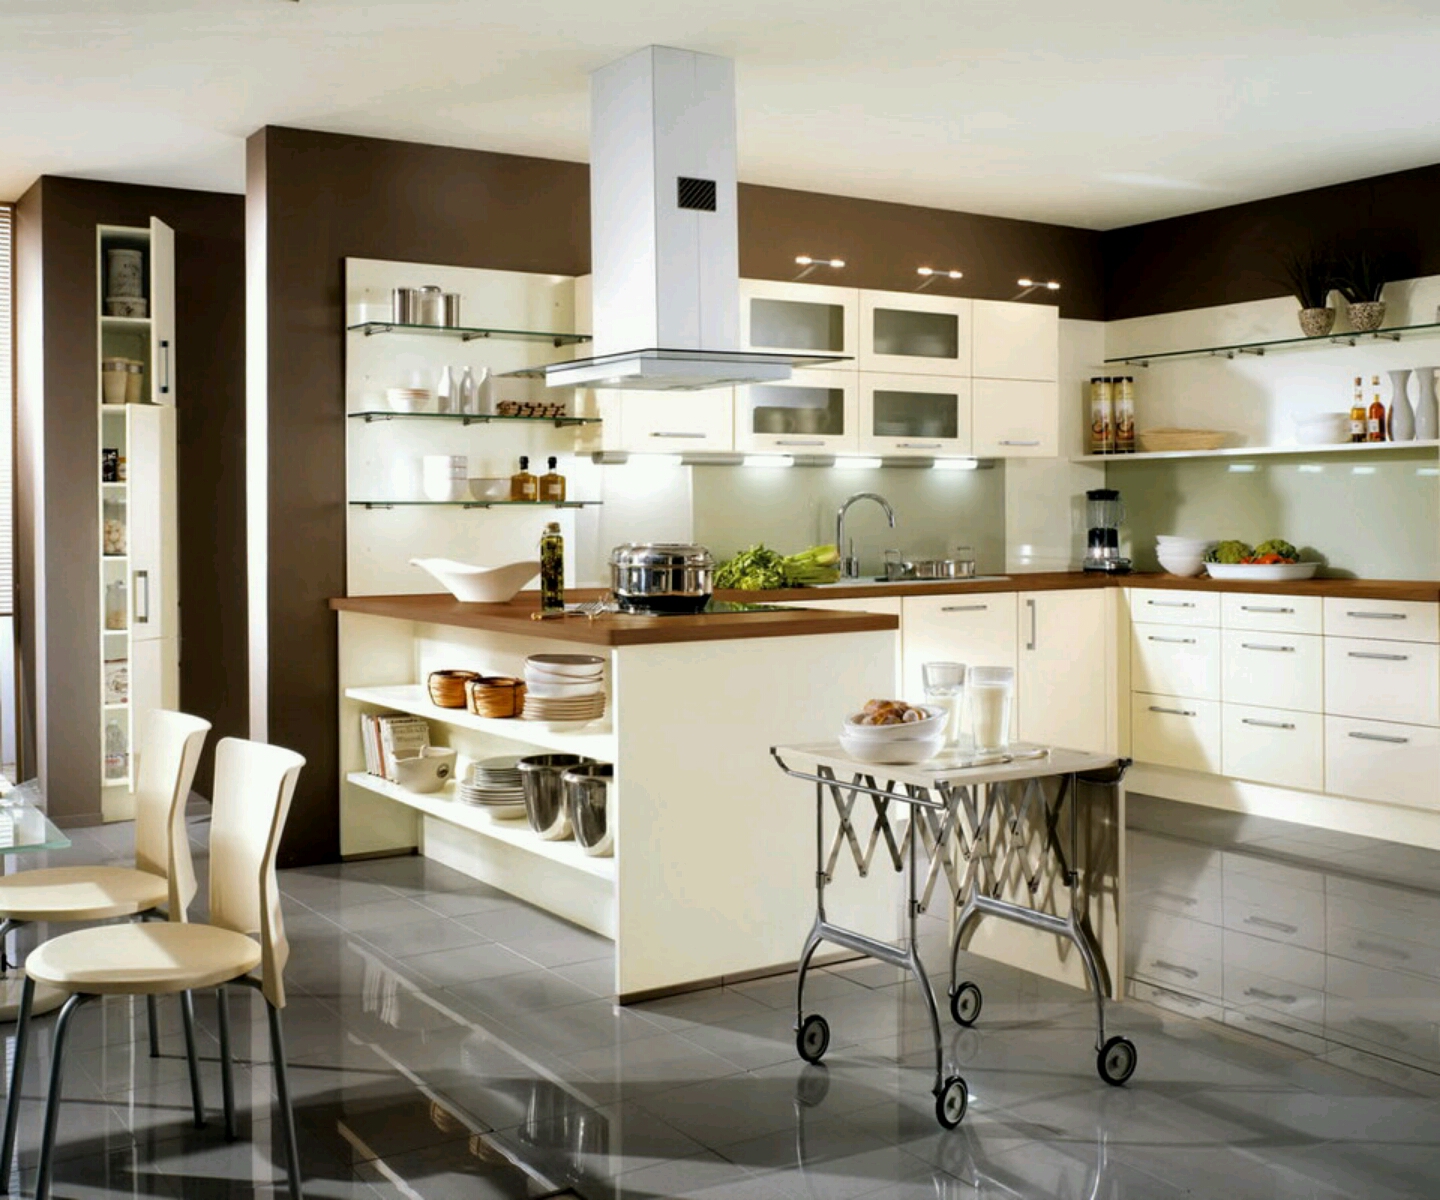 Minimalist Kitchen Furniture Gallery for Living room